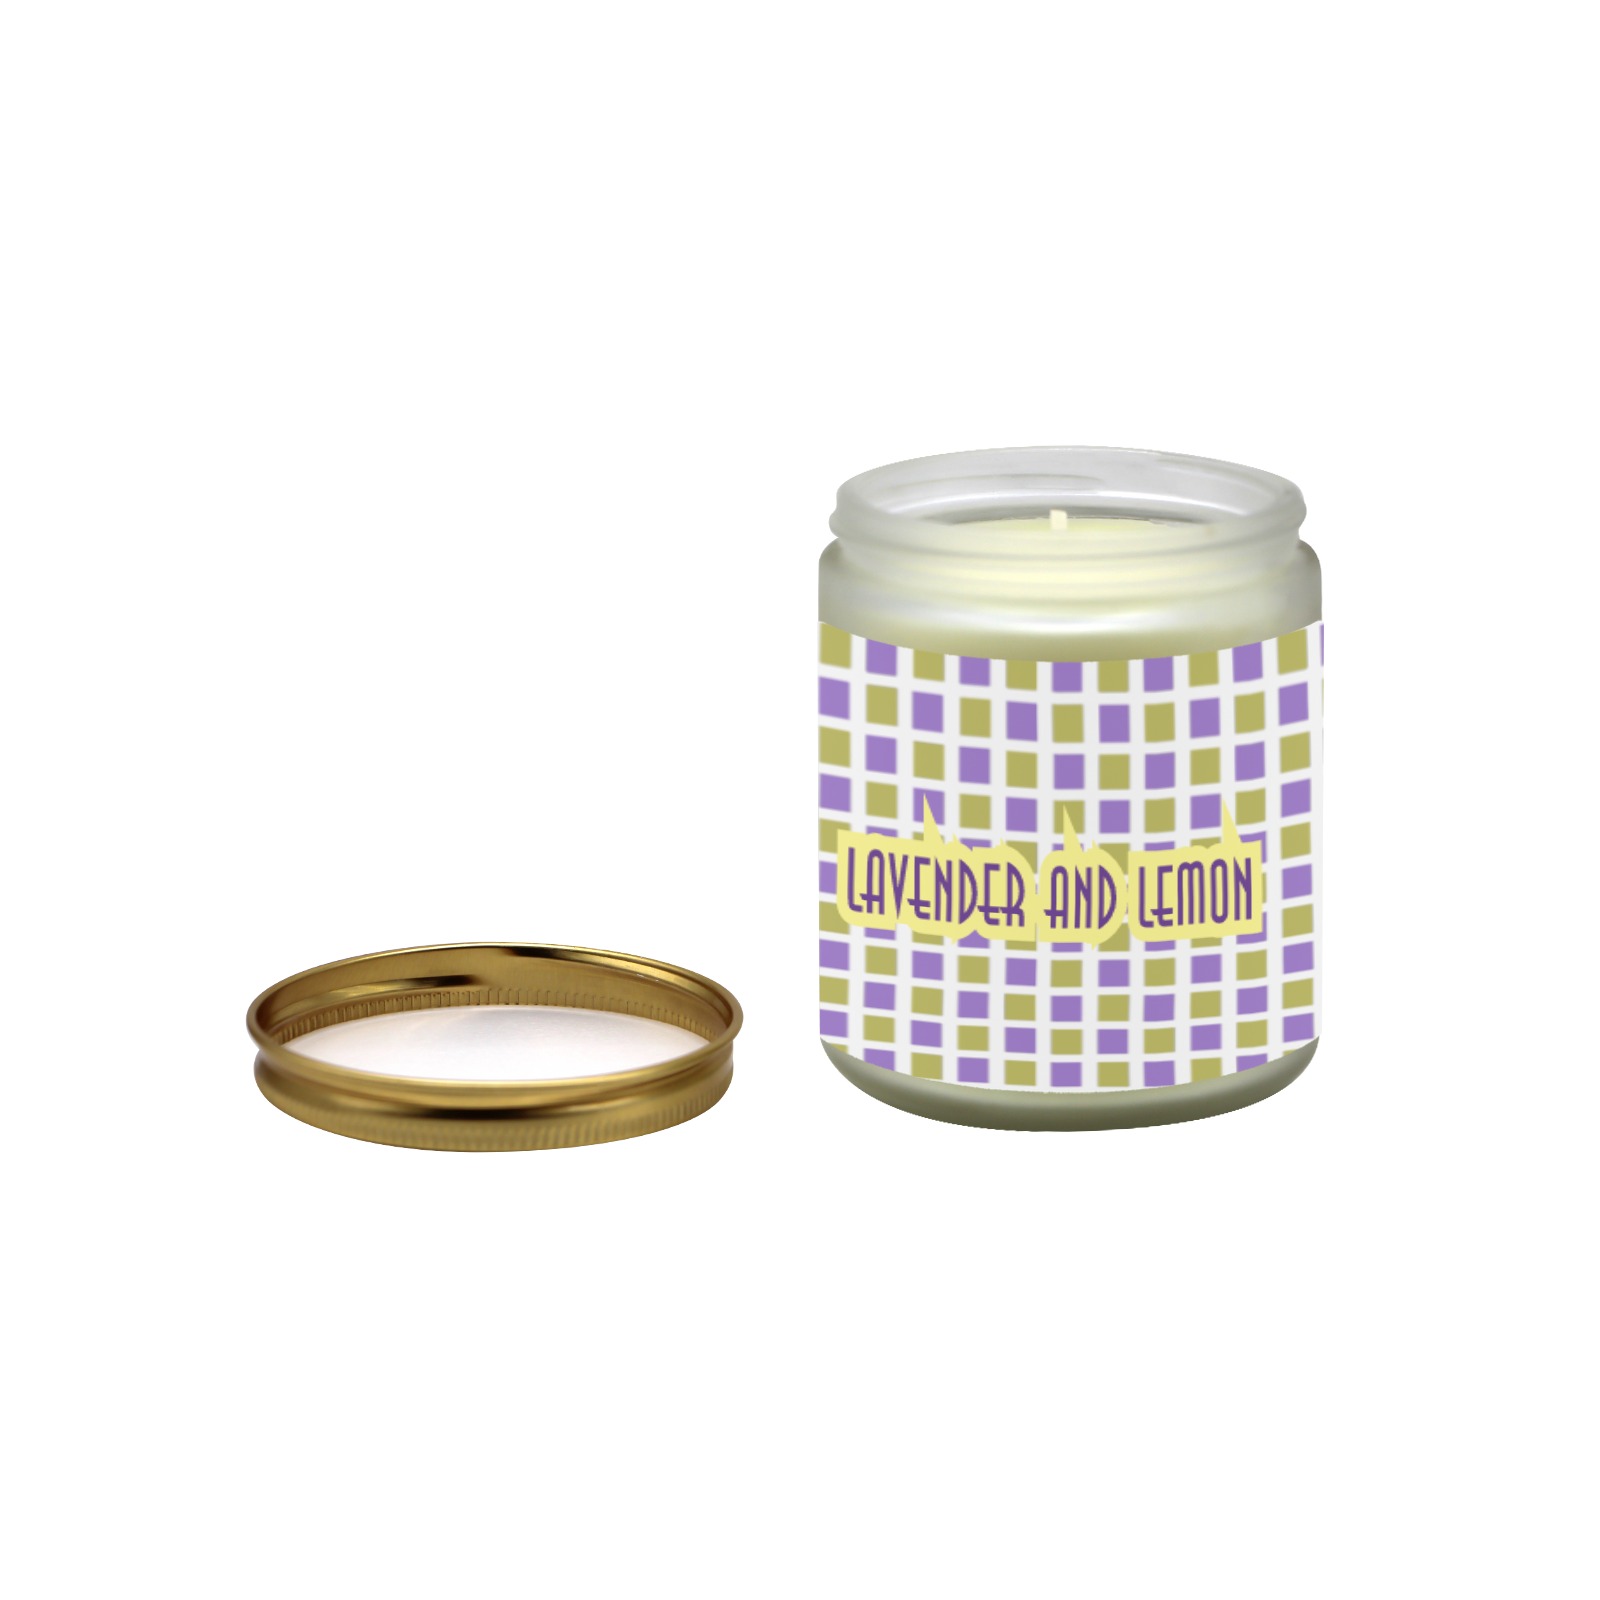 Gold and Mauve lavender and lemon Frosted Glass Candle Cup - Large Size (Lavender&Lemon)